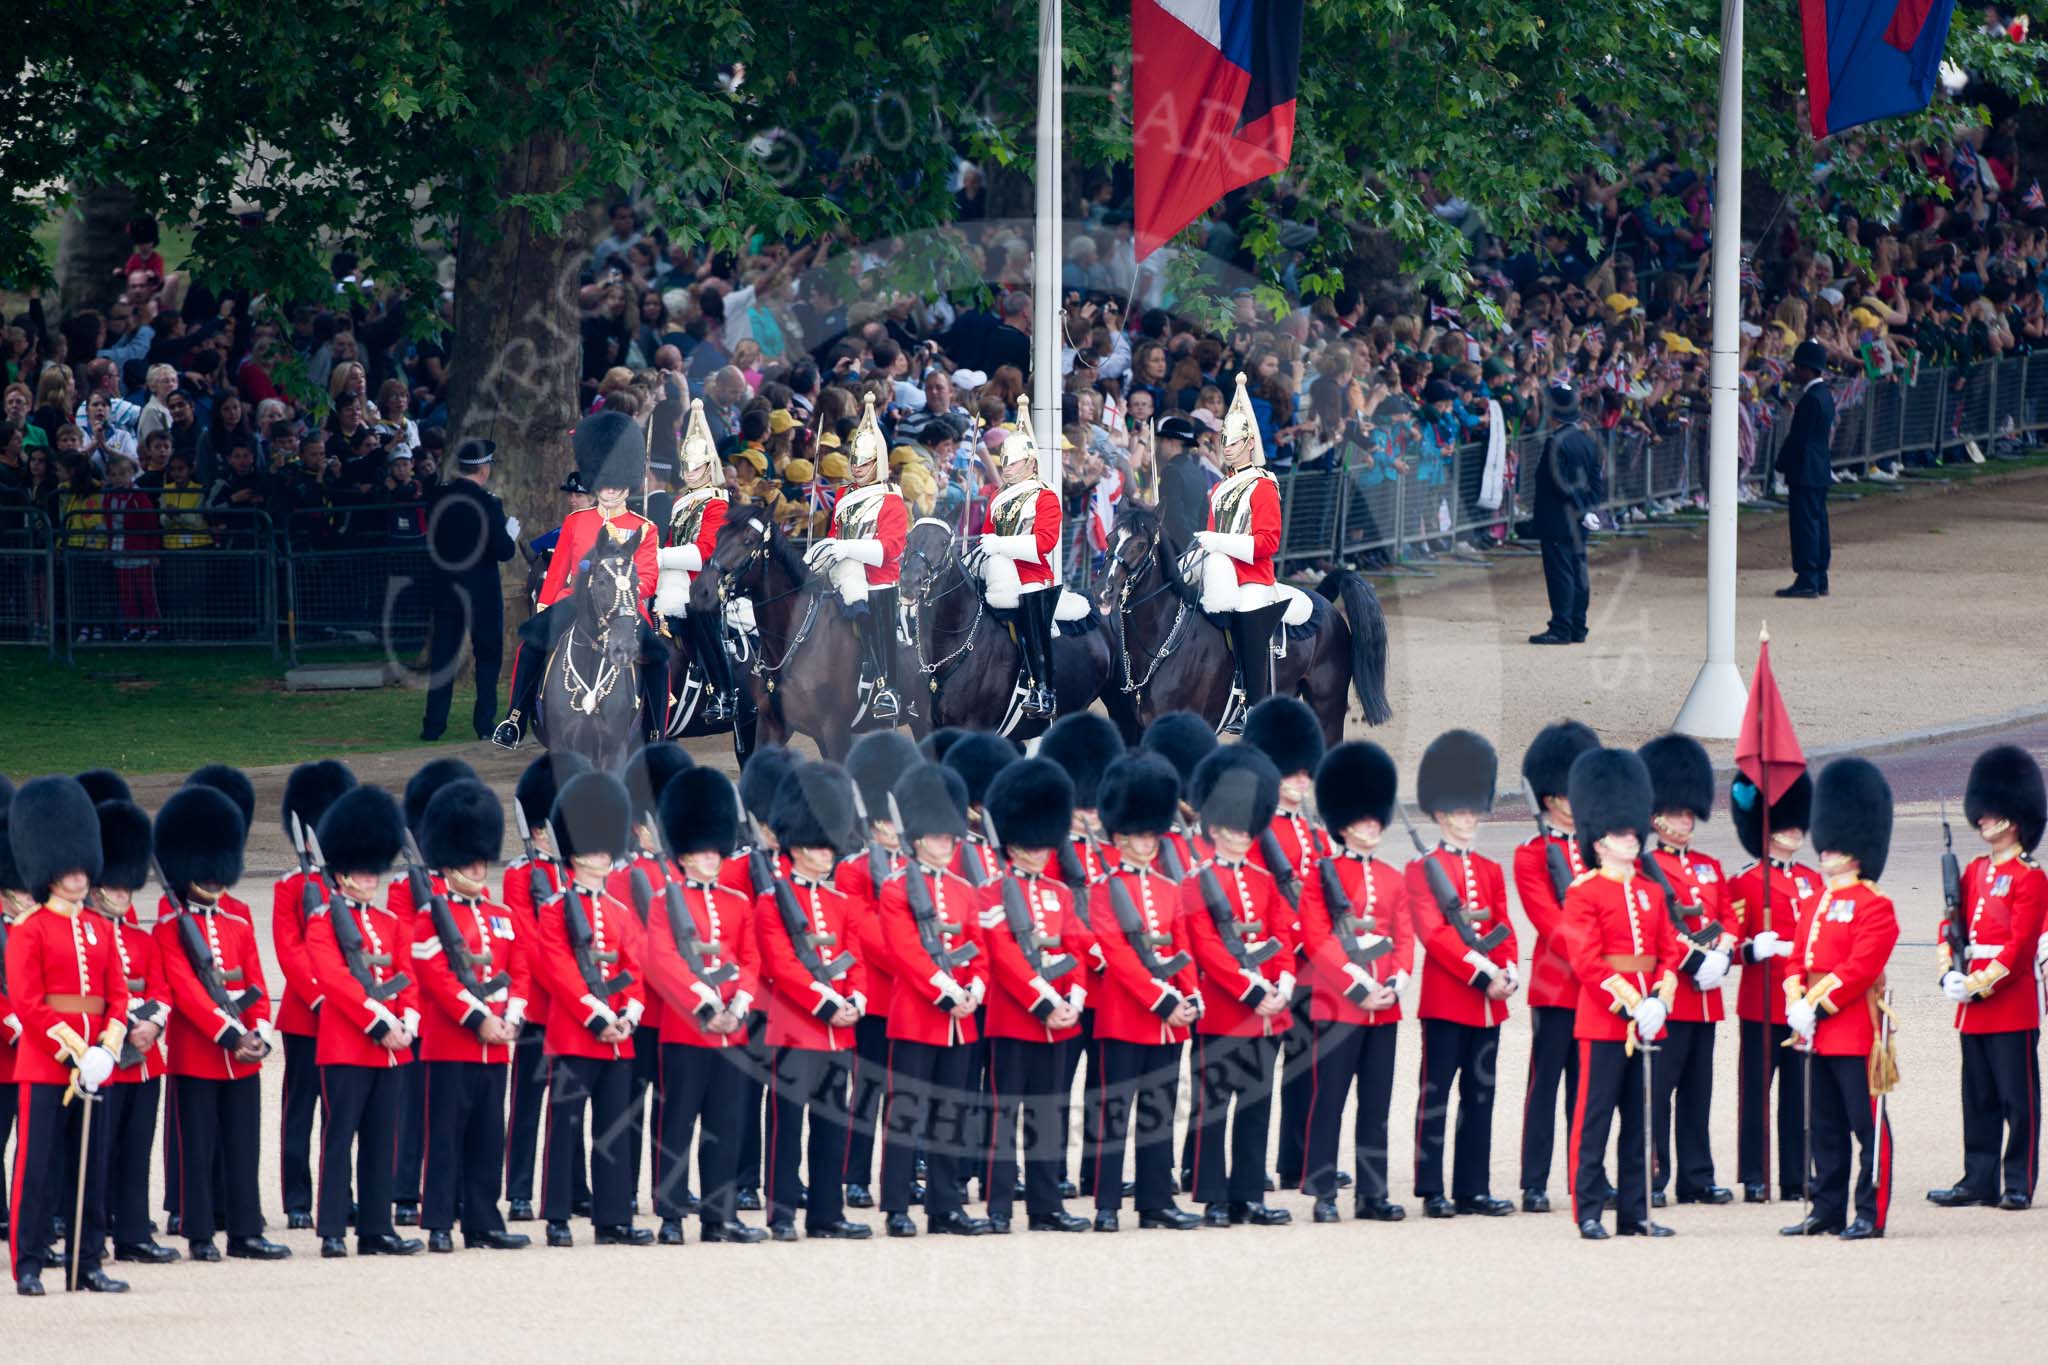 Trooping the Colour 2009: Leading the Royal Procession, the Brigade Major Household Division, Lieutenant Colonel Jeremy Bagshaw, followed by four Troopers of The Life Guards, arrives on Horse Guards Parade..
Horse Guards Parade, Westminster,
London SW1,

United Kingdom,
on 13 June 2009 at 10:54, image #102